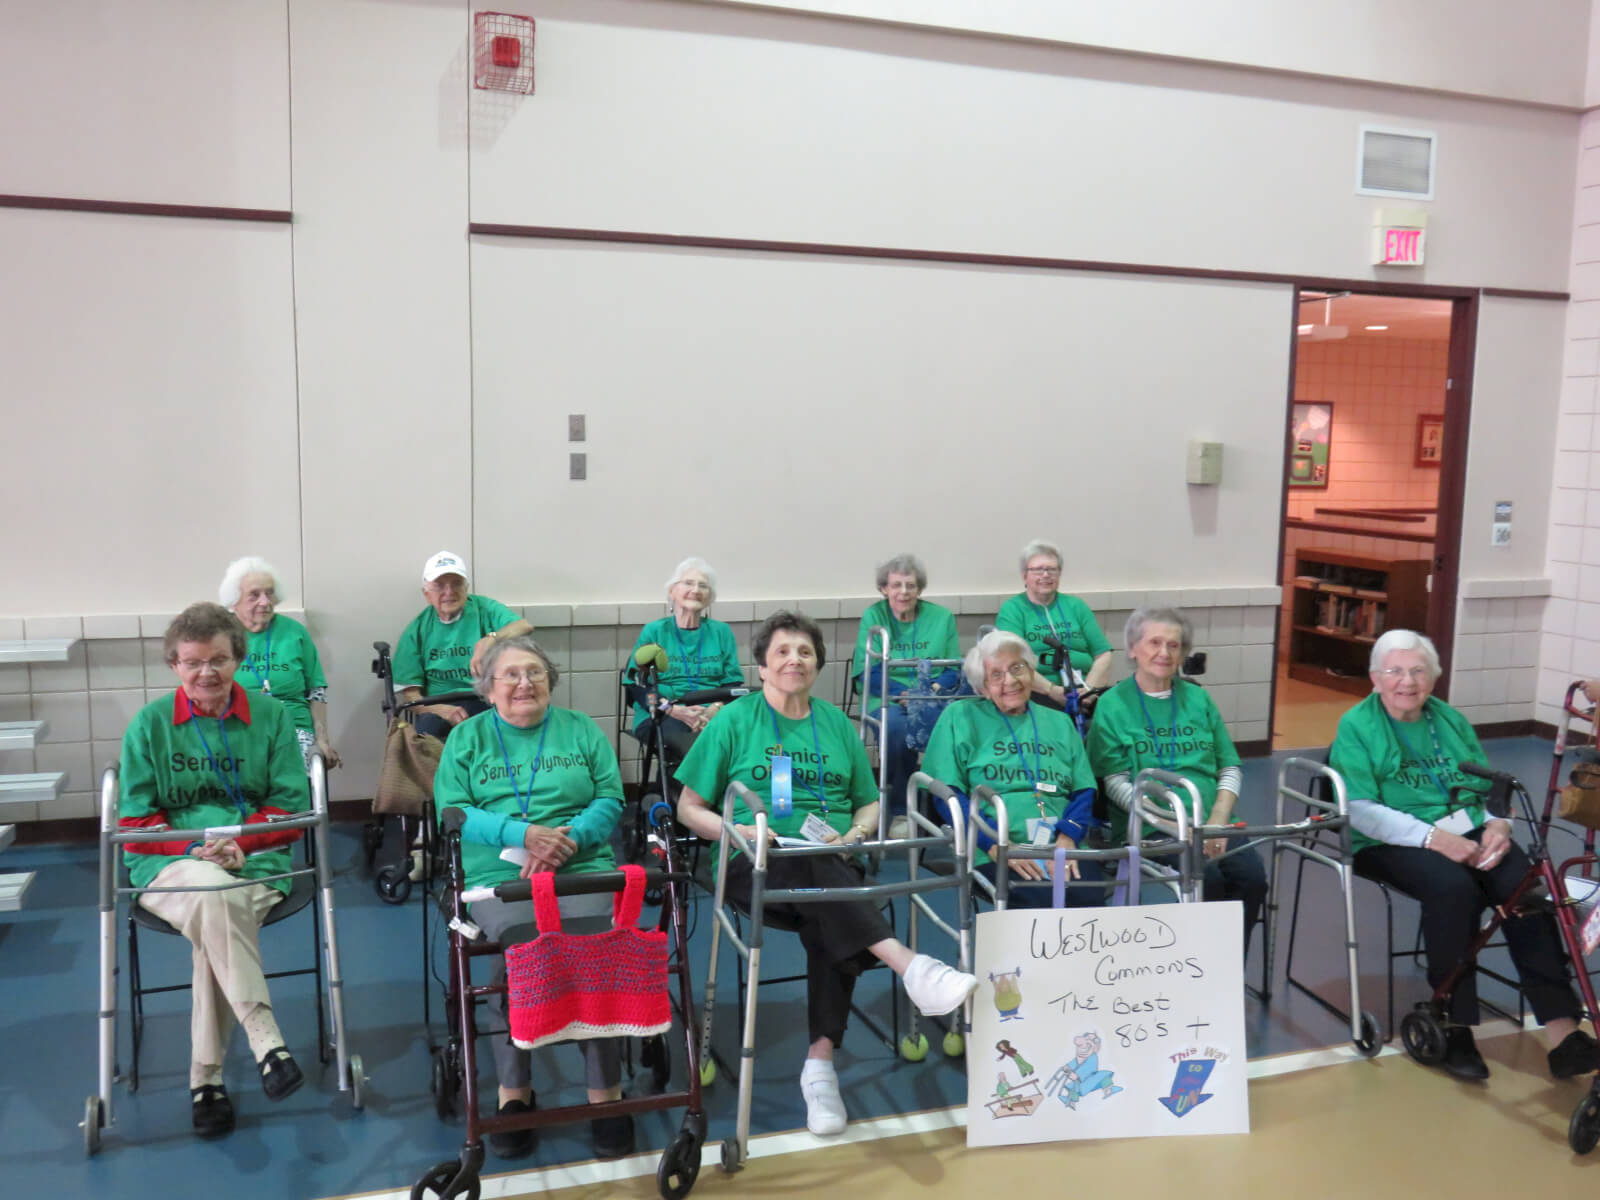 DePaul's Westwood Commons Assisted Living Senior Olympics Team Group Photo